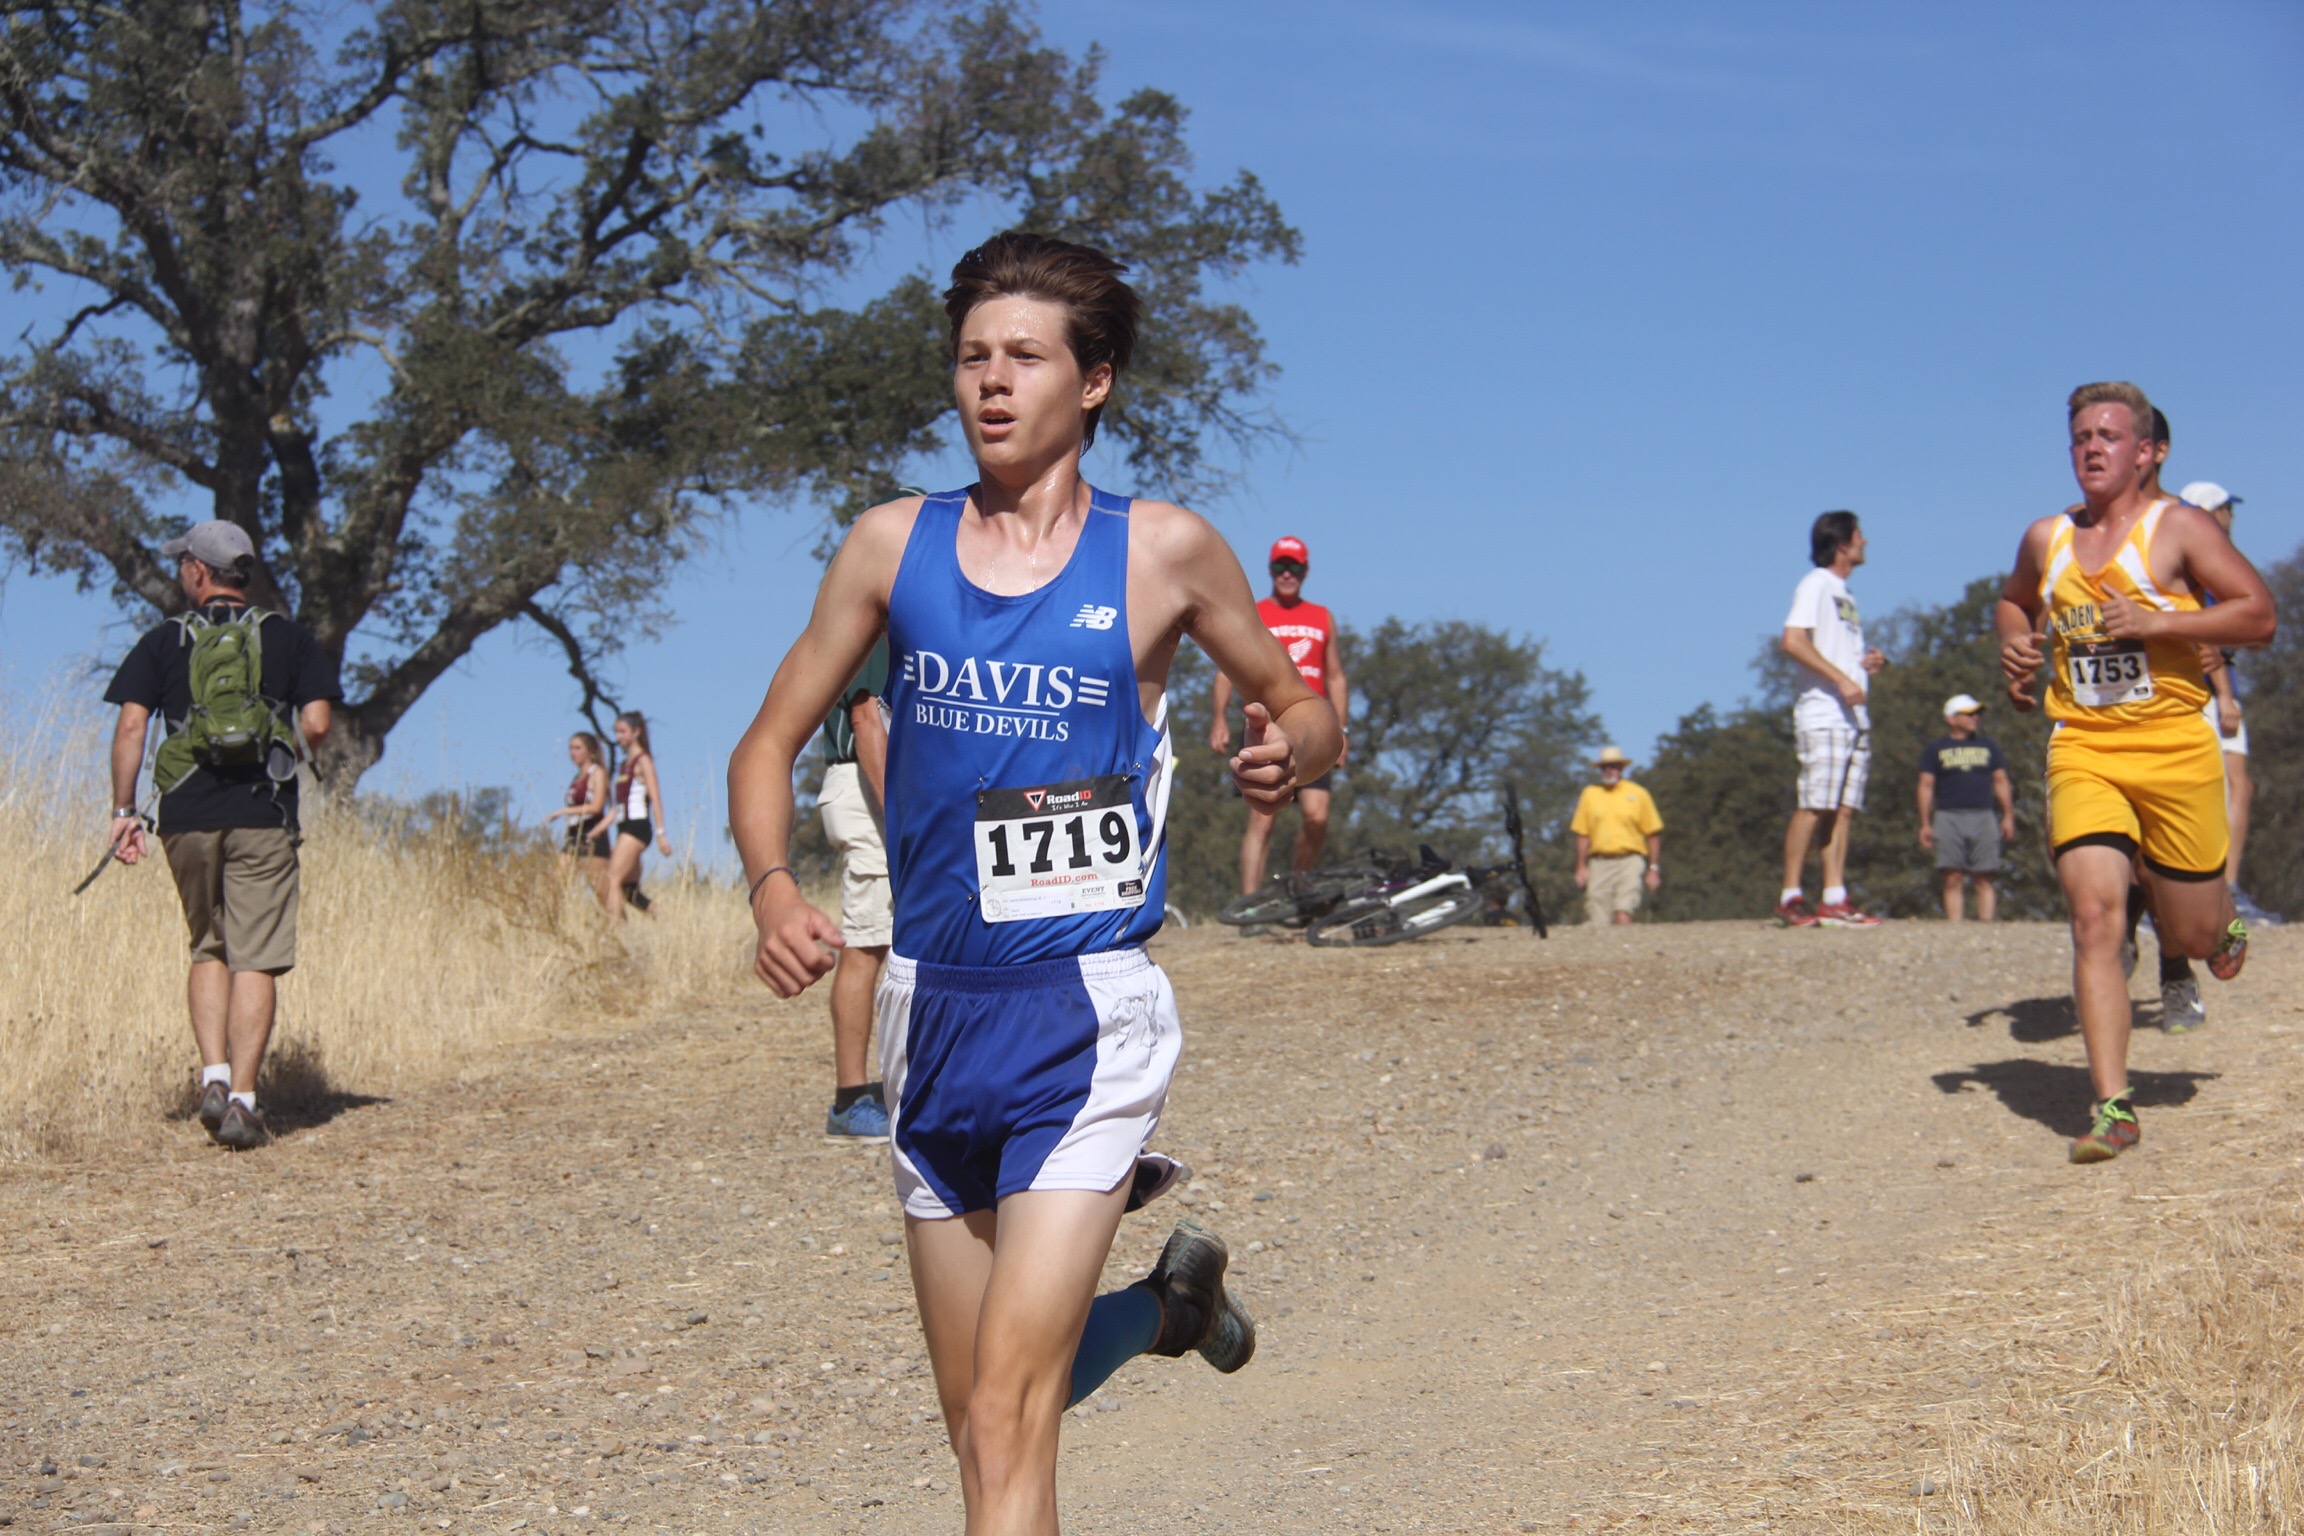 Junior Jamie Moddlemog races in the men's varsity division, helping the team to finish in fifth place.